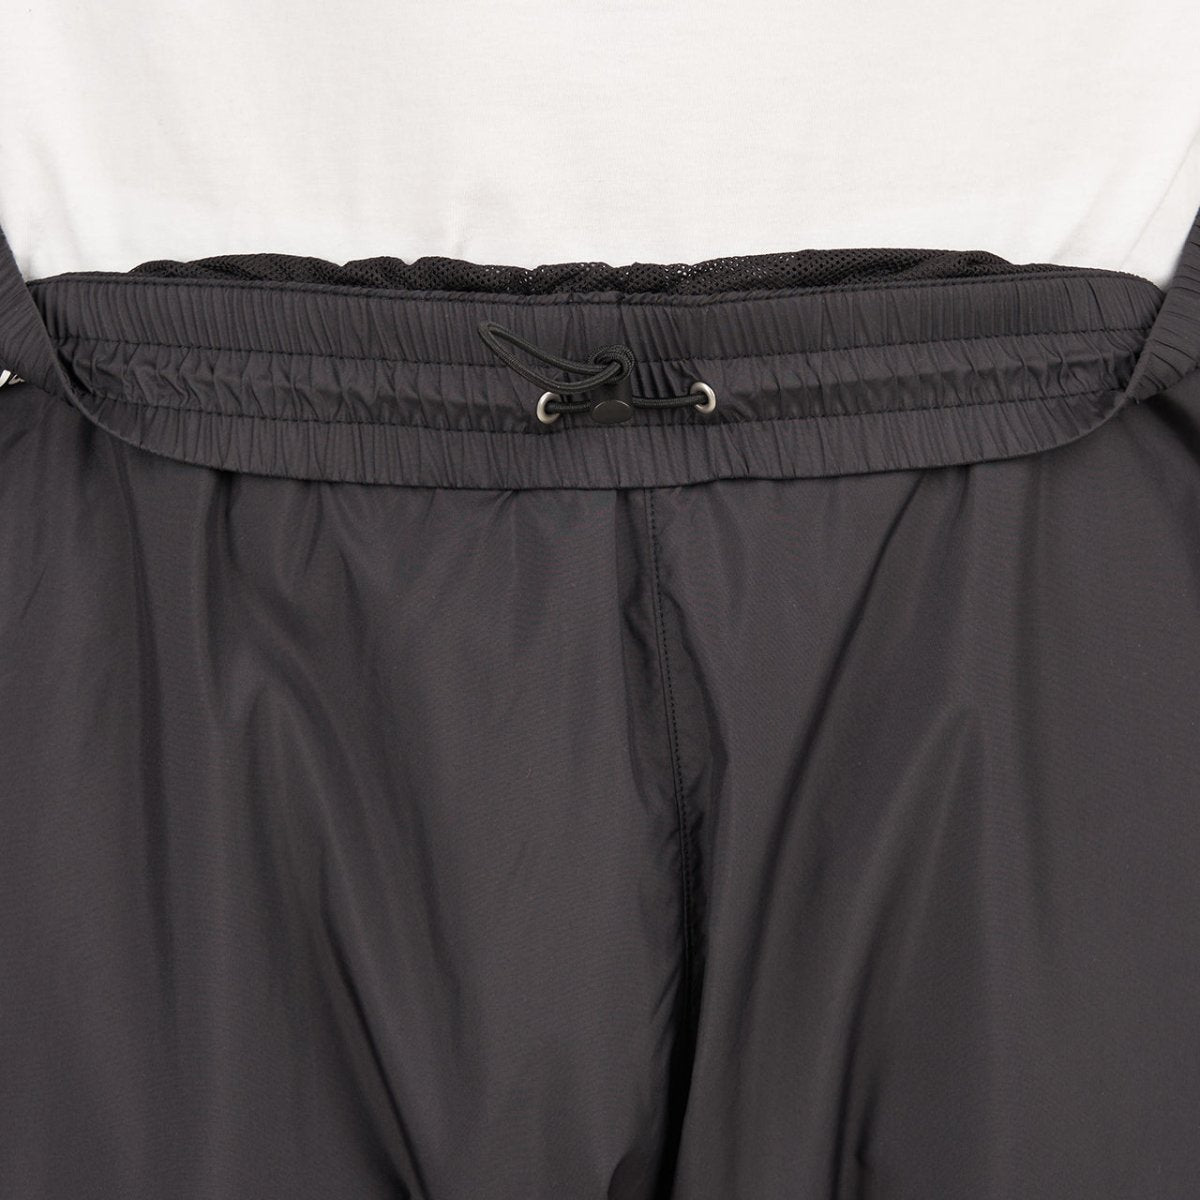 The North Face Hydrenaline Pants 2000 (Schwarz)  - Allike Store